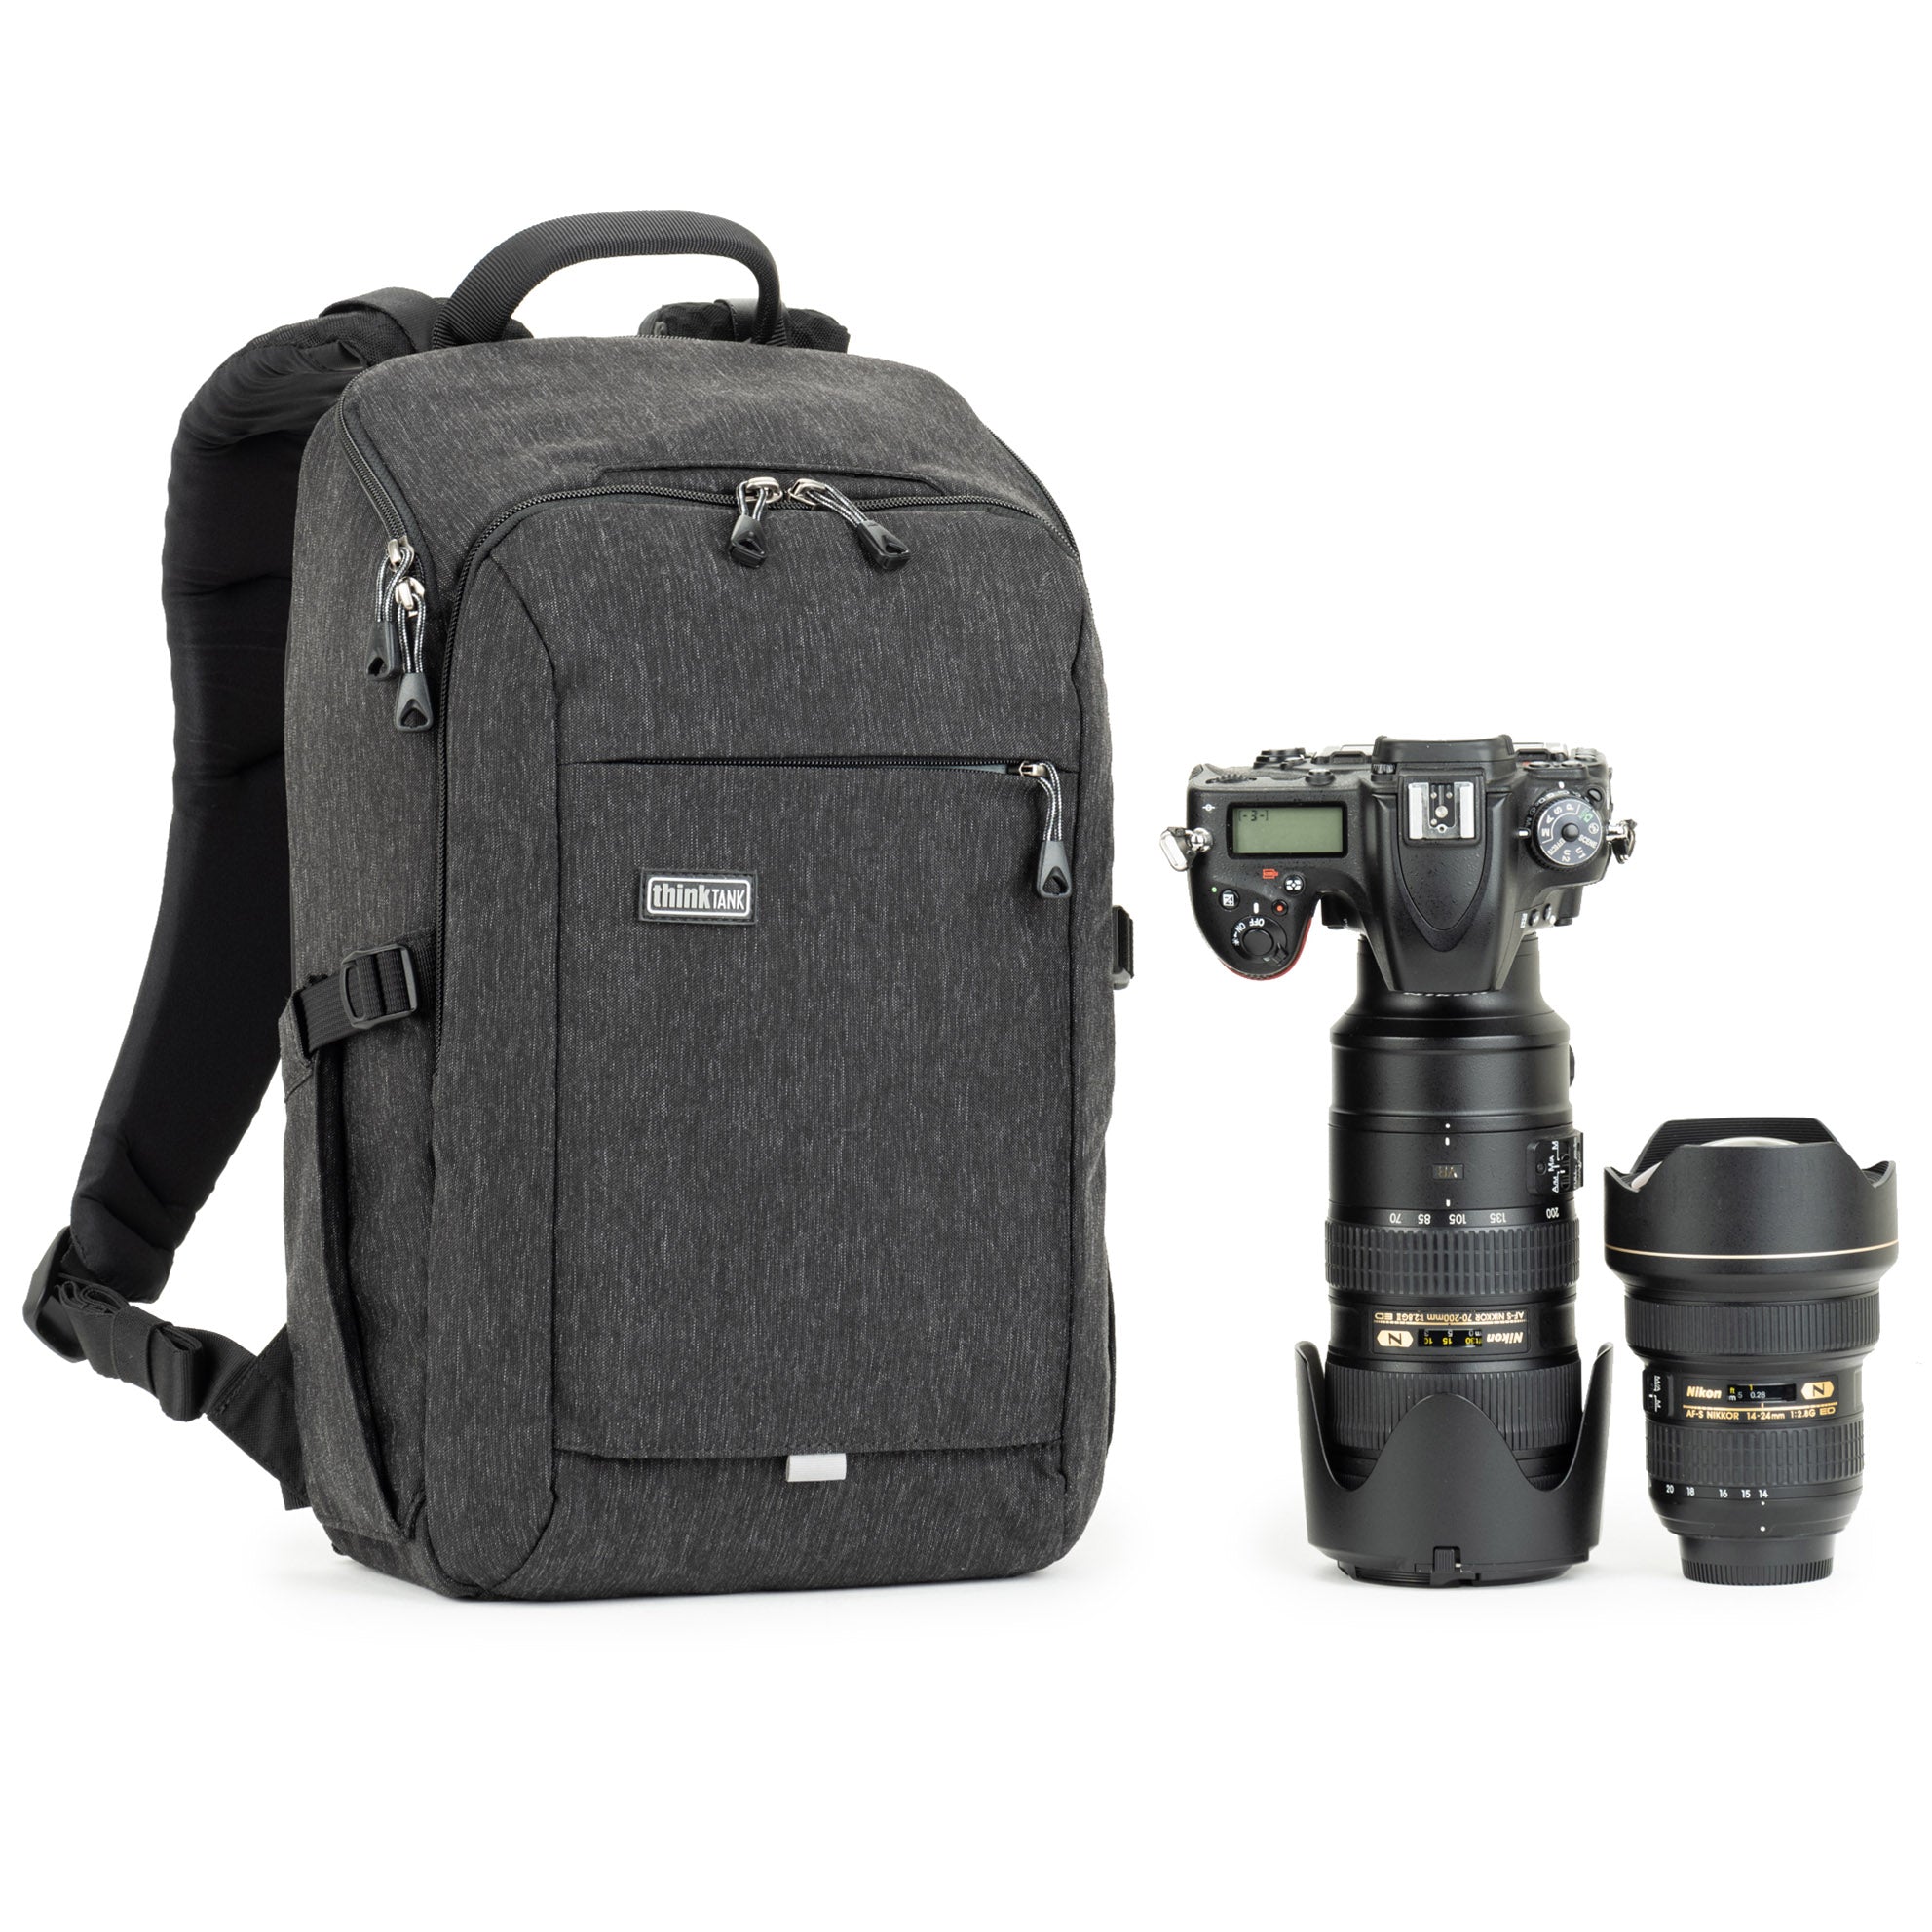 The BackStory’s rear-panel opening offers complete access to your gear while a top panel provides quick access to your camera and speeds your workflow.